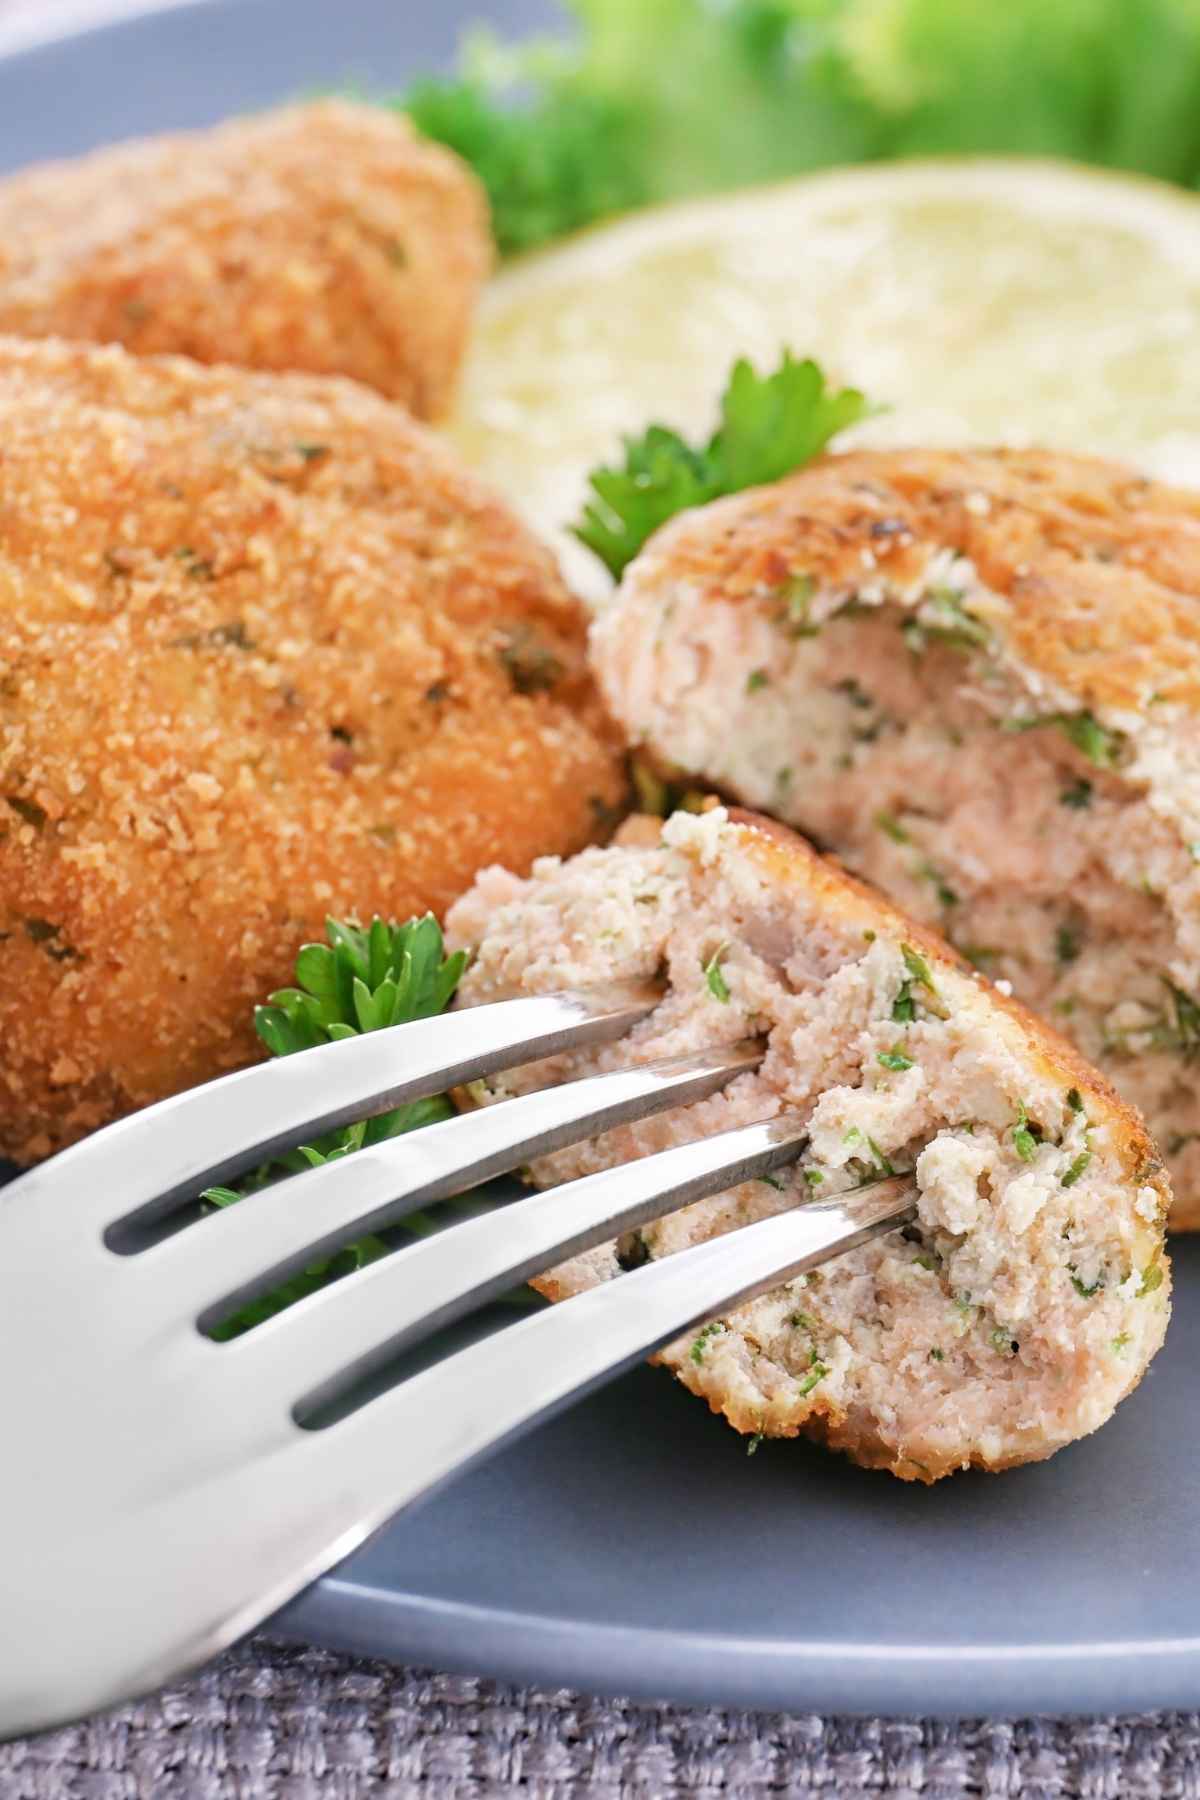 Salmon patties are delicious fishcakes that are crisp on the outside and tender on the inside. Once you’ve decided to make these delightful patties for dinner, the next step is to figure out what to serve with them. We’ve rounded up the best easy side dishes that go well with salmon patties.